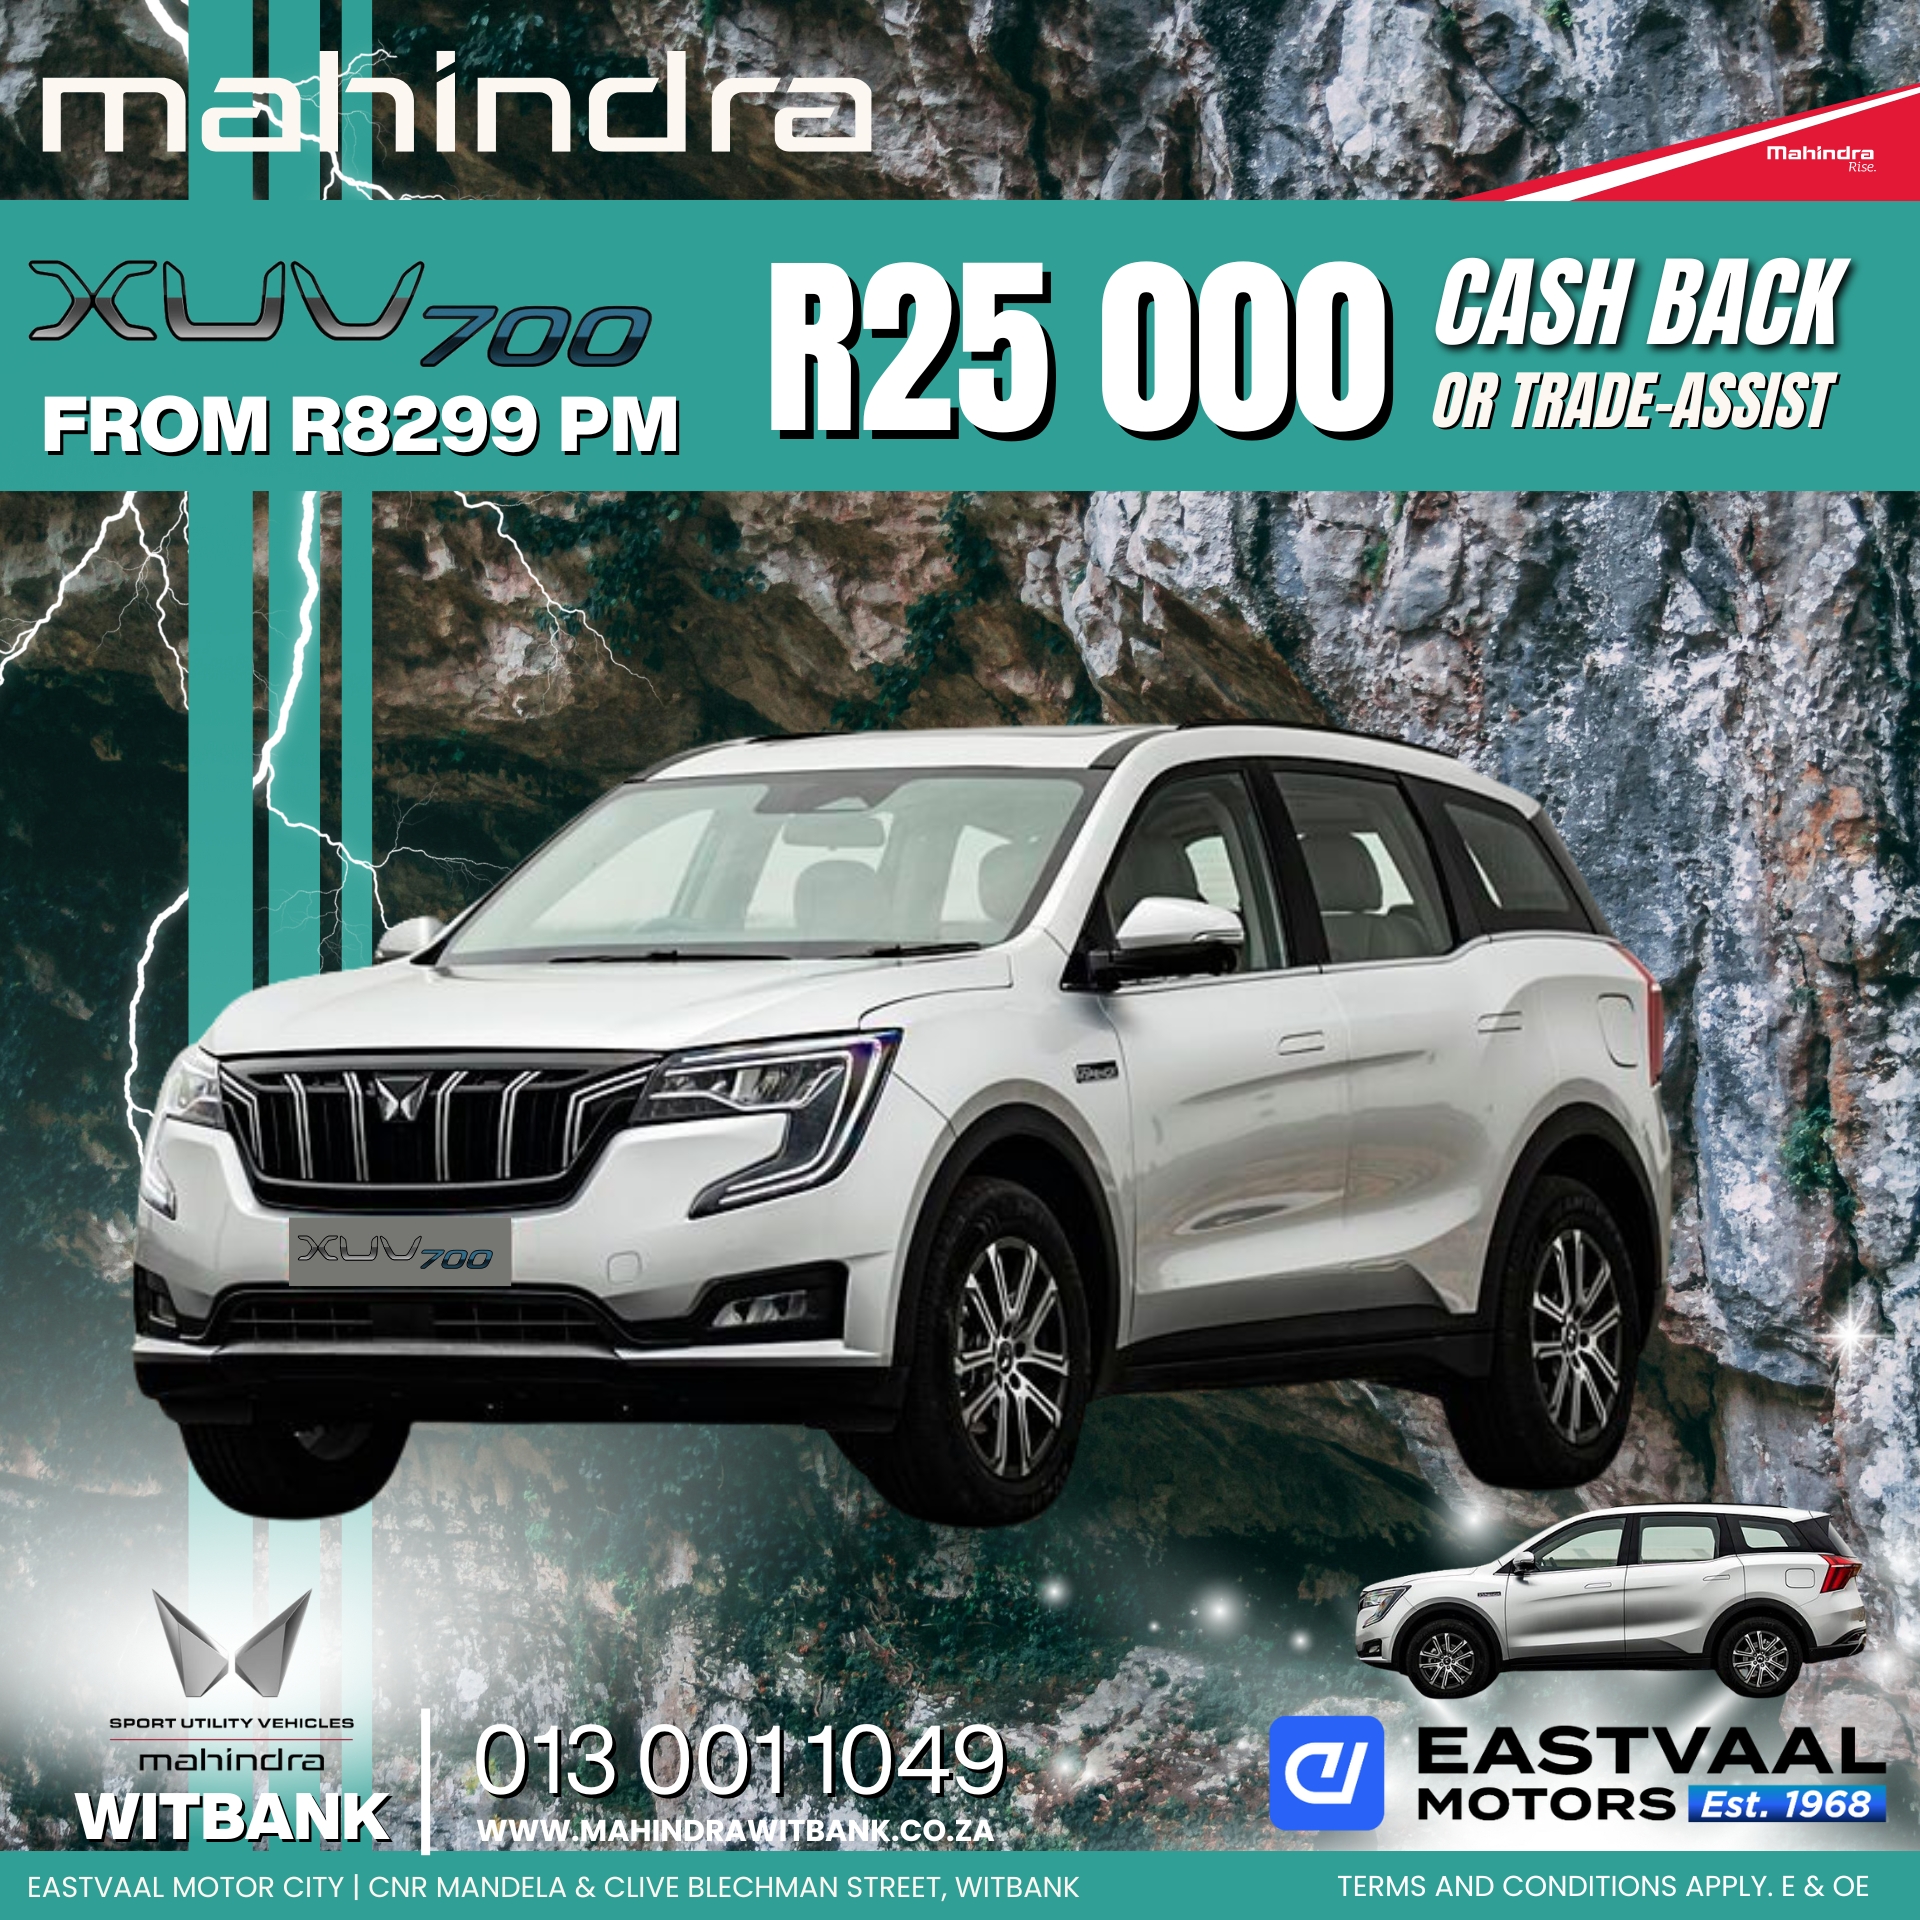 Kick off July in style with a brand new Mahindra from Eastvaal Motor City. Visit us now for amazing offers! image from 